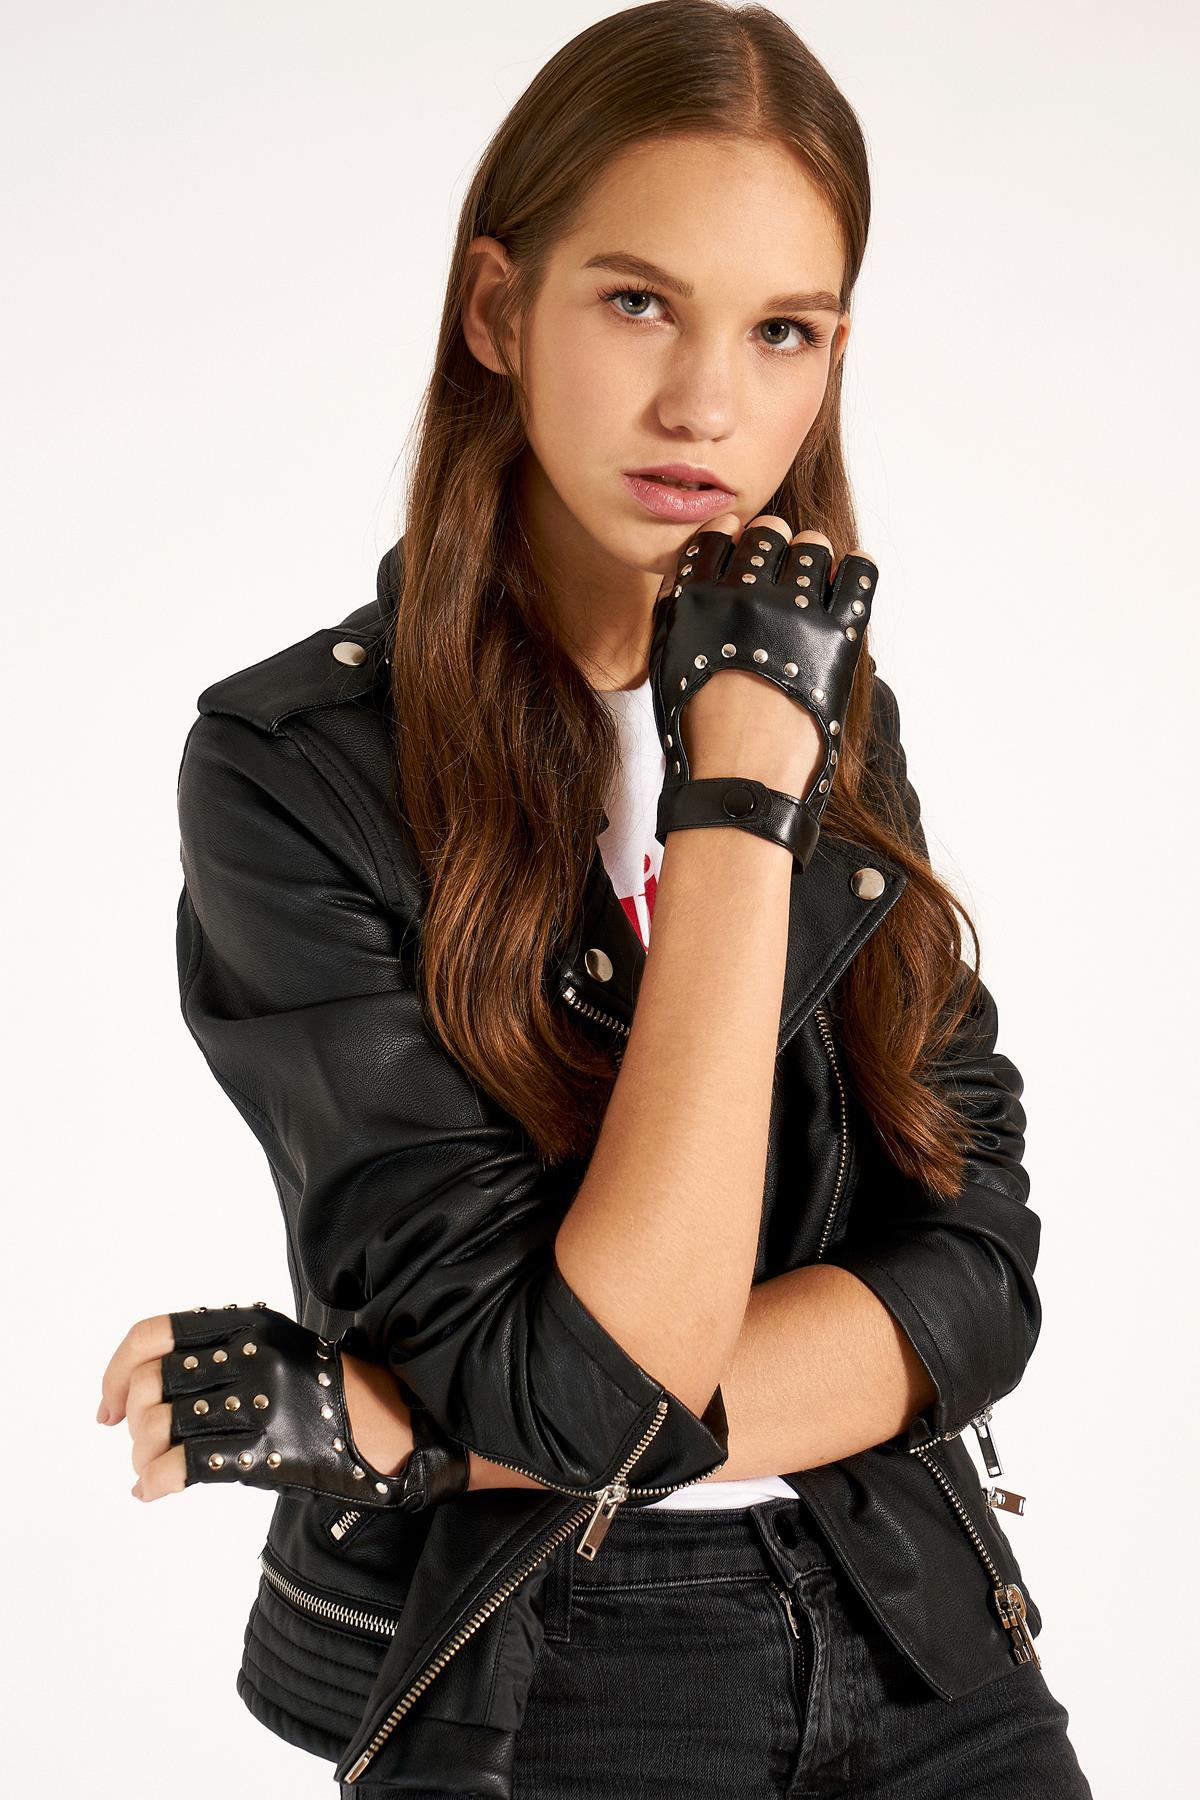 A model wears NSV11234 - Cut-Troque Leather Gloves - Black, wholesale Glove of Nesvay to display at Lonca